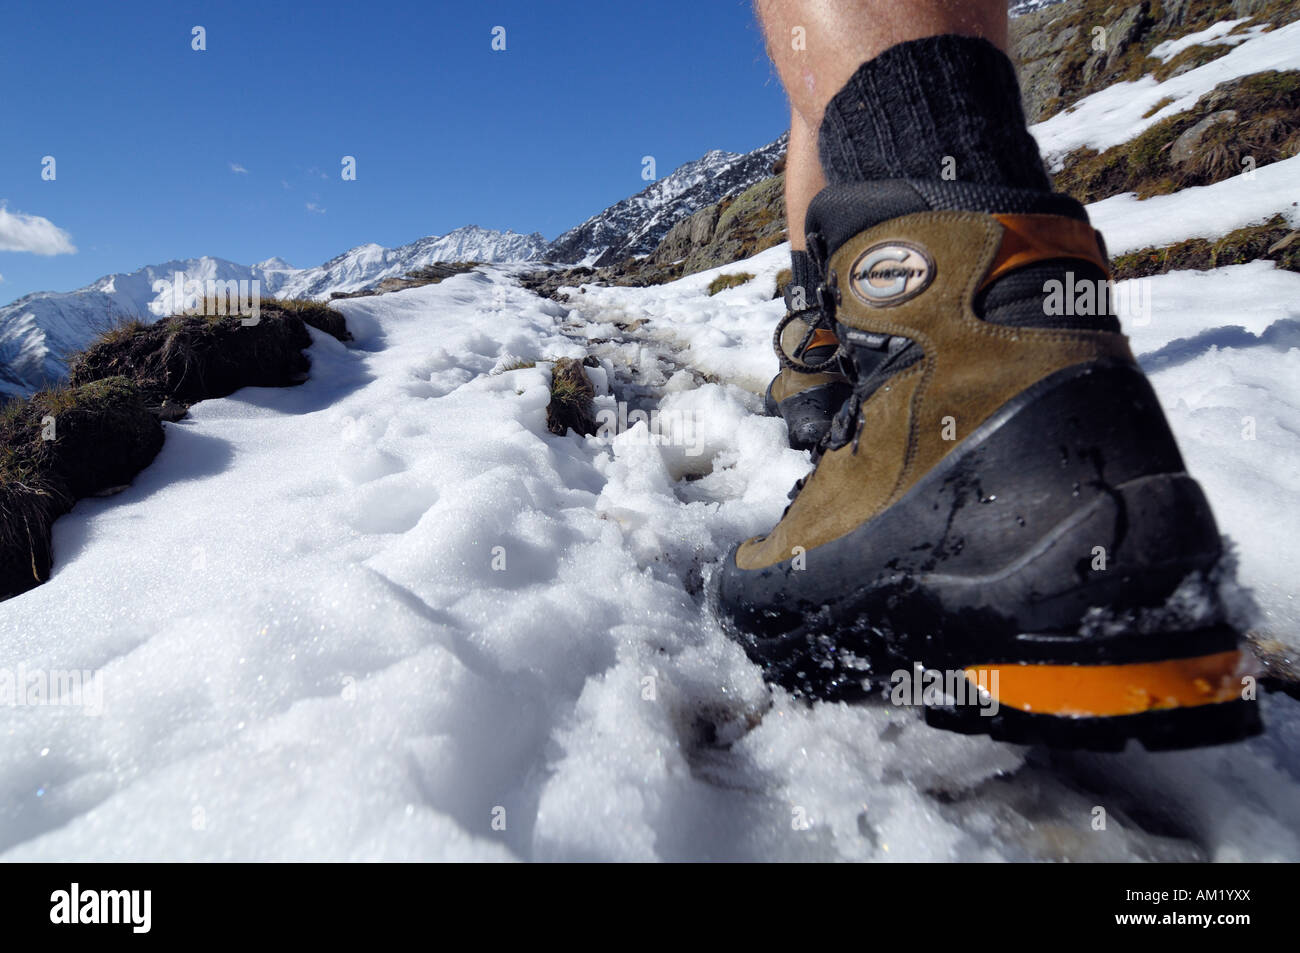 Feet and climbing boots of a hiker, Texelgruppe, South Tyrol, Italy Stock Photo